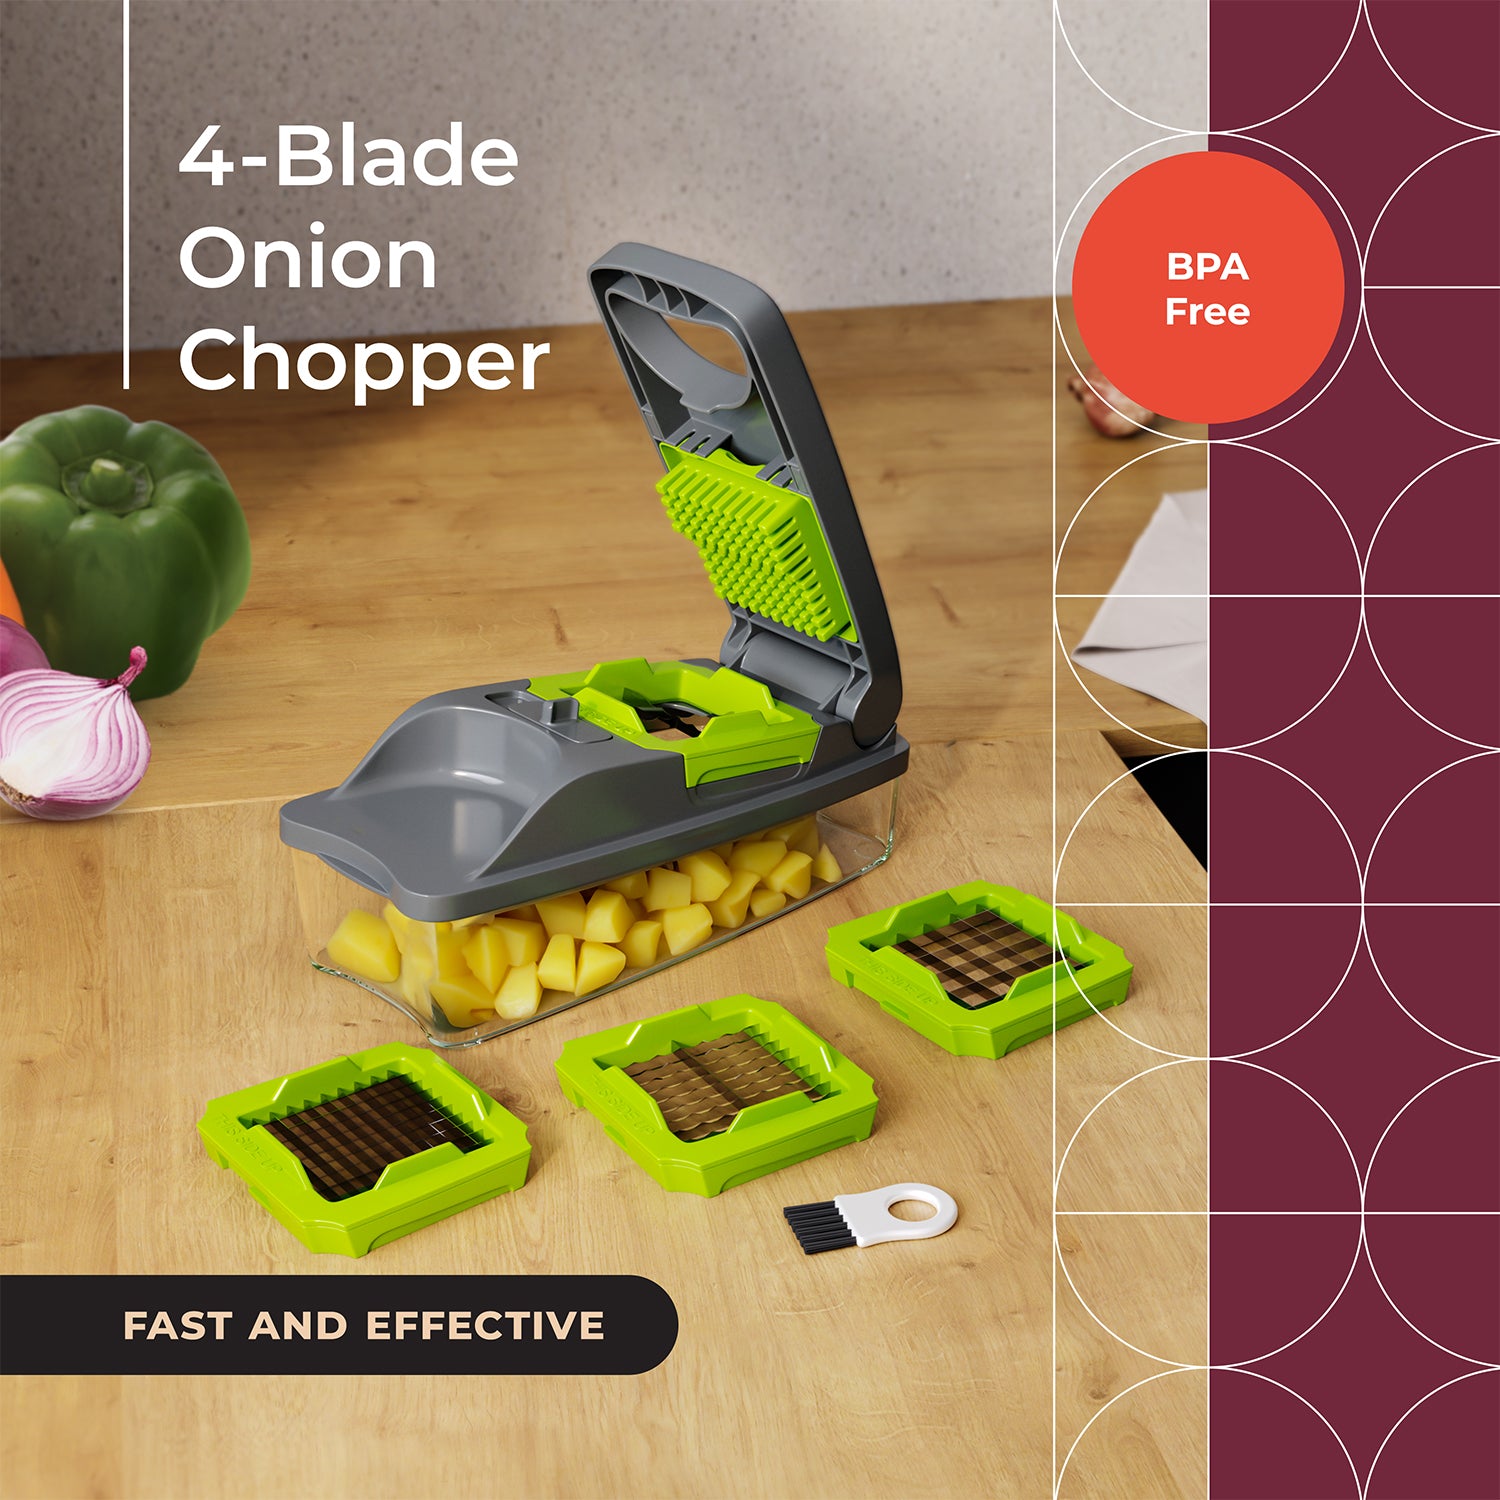 The Fullstar Vegetable Chopper is currently 40% off